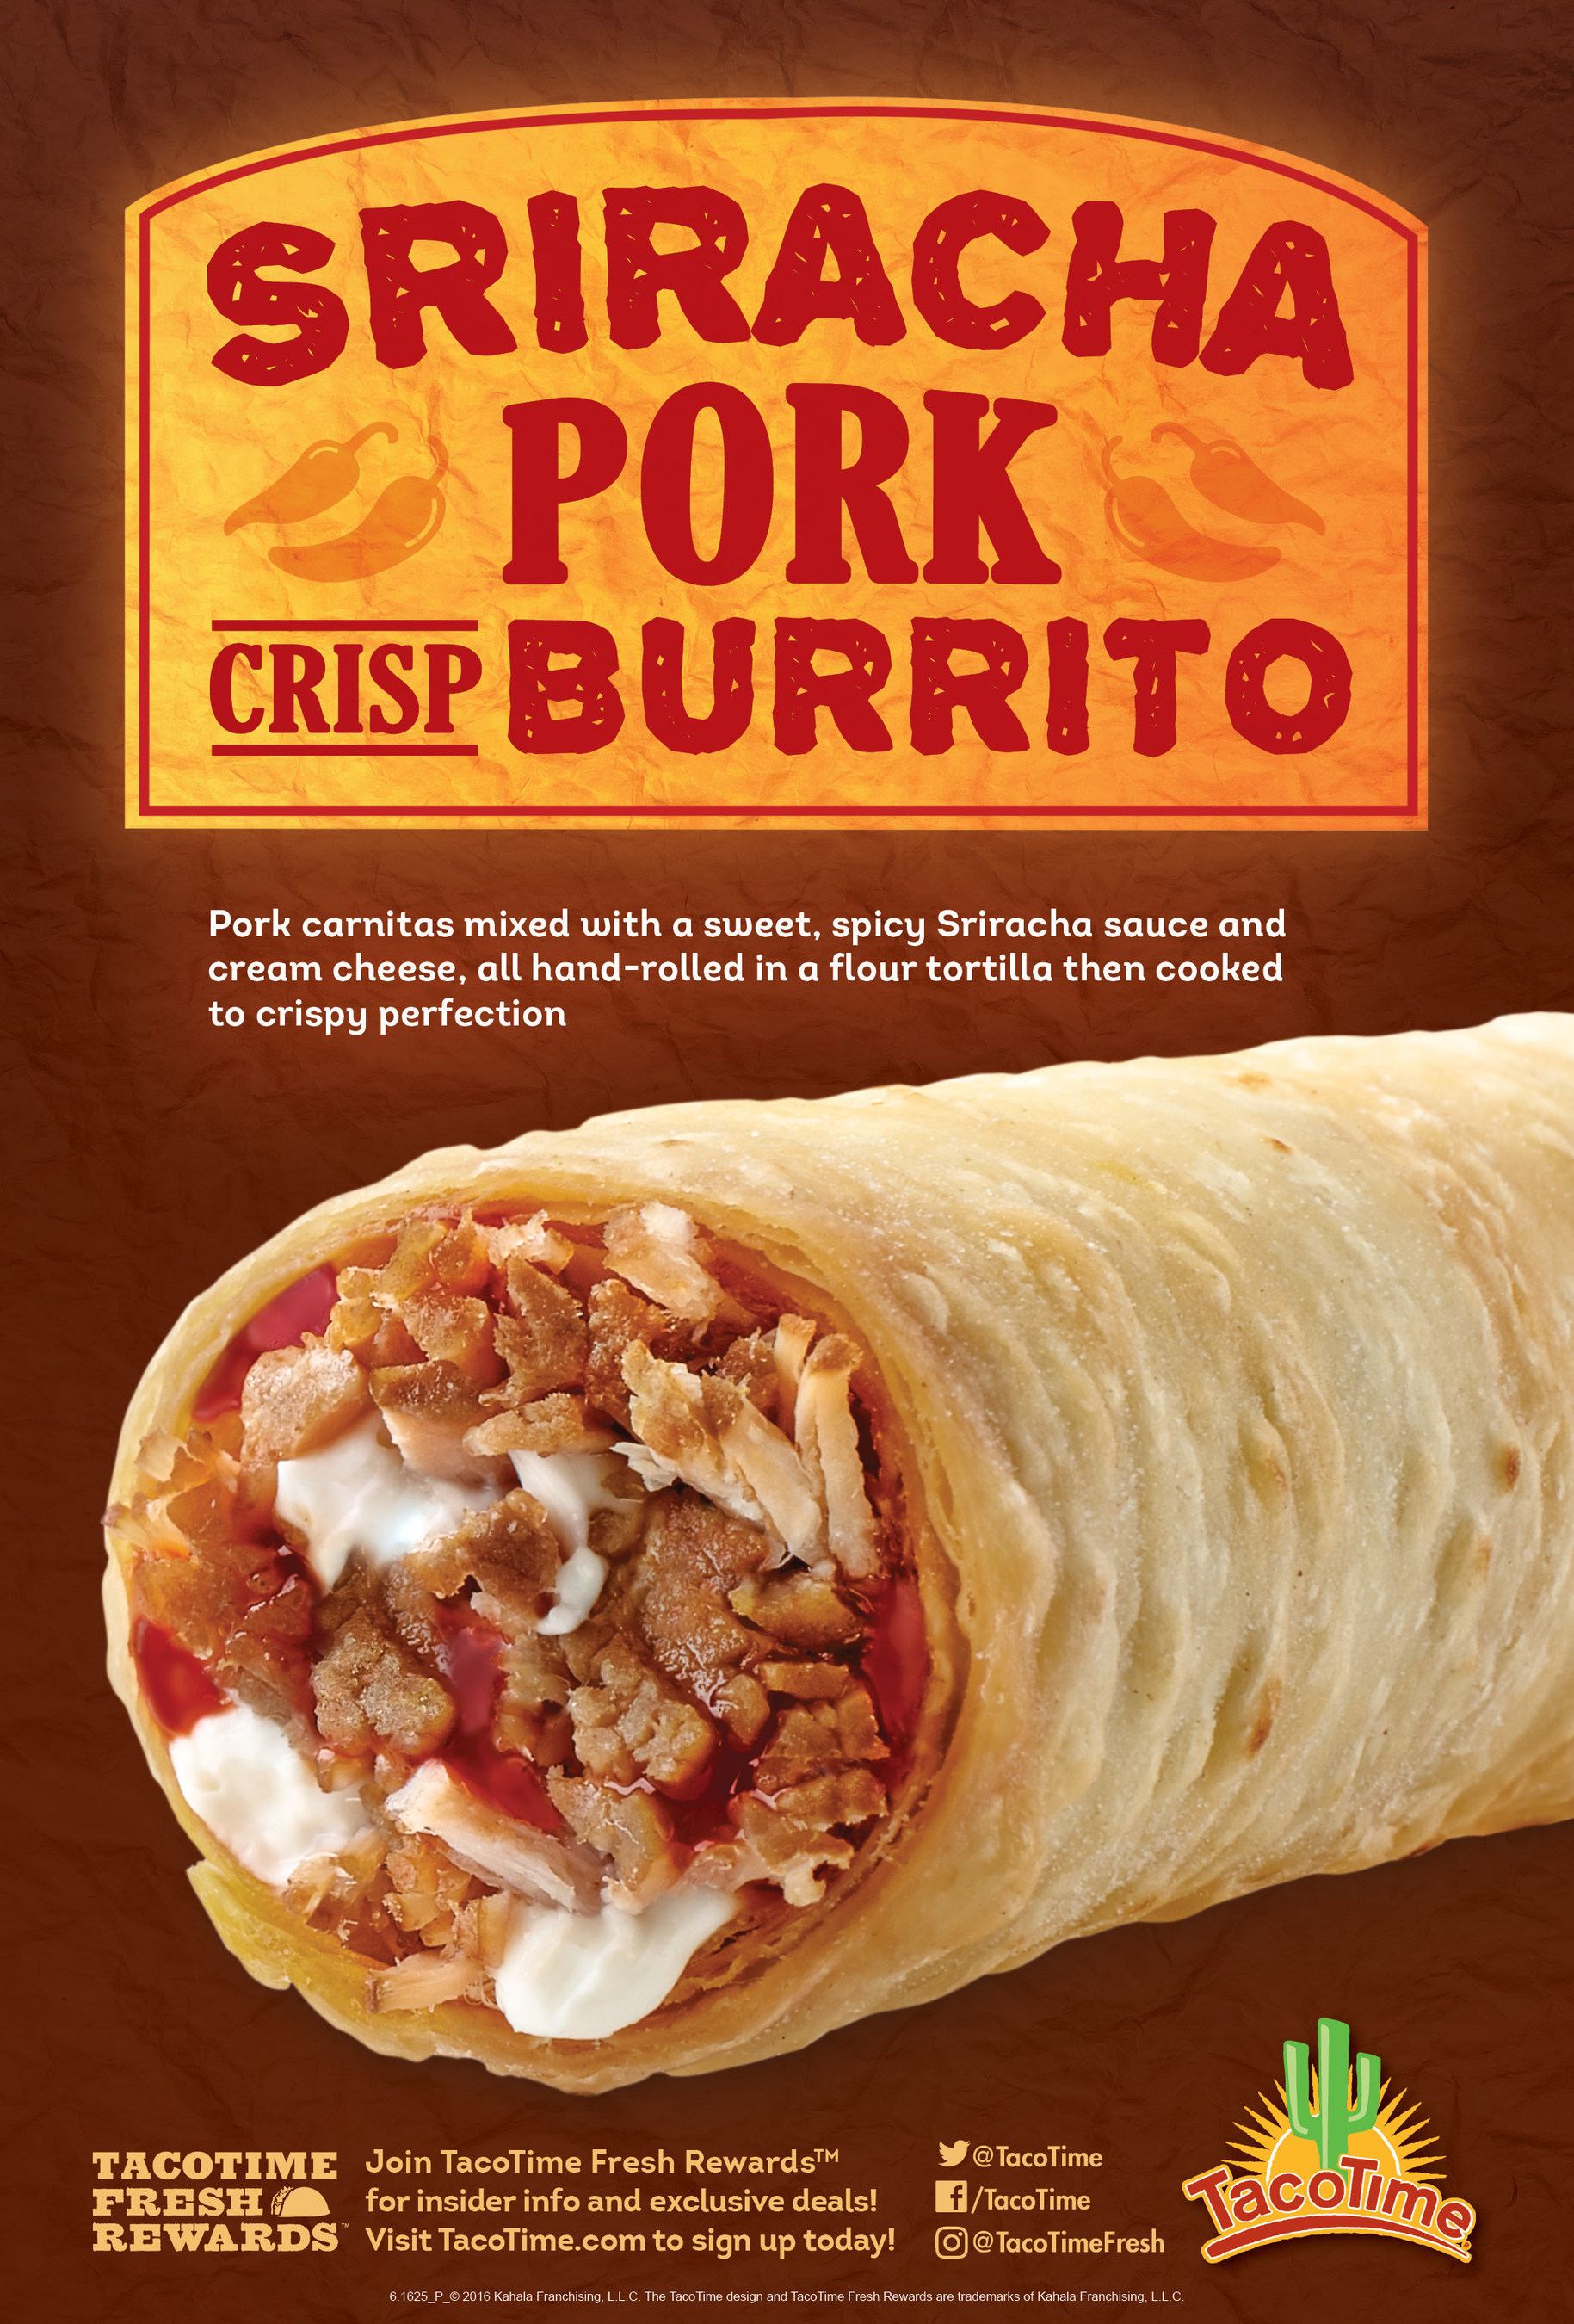 TacoTime(R) spices things up with the new Sriracha Pork Crisp Burrito, available beginning August 31 for a limited time only.